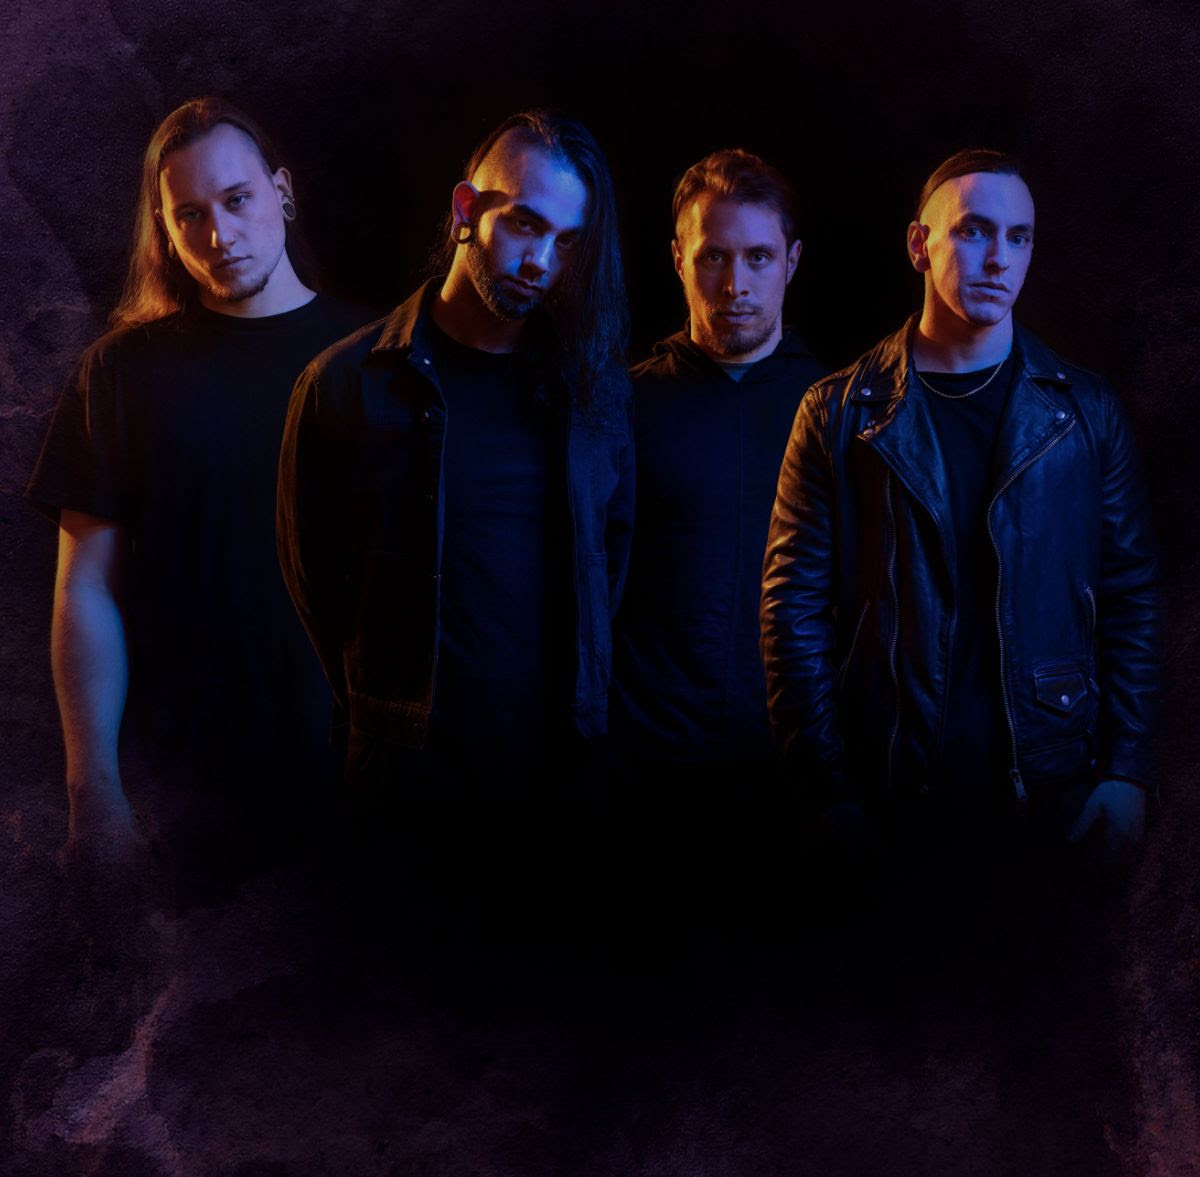 Fallujah to release new album in March, unveils “Ultraviolet” Music Video